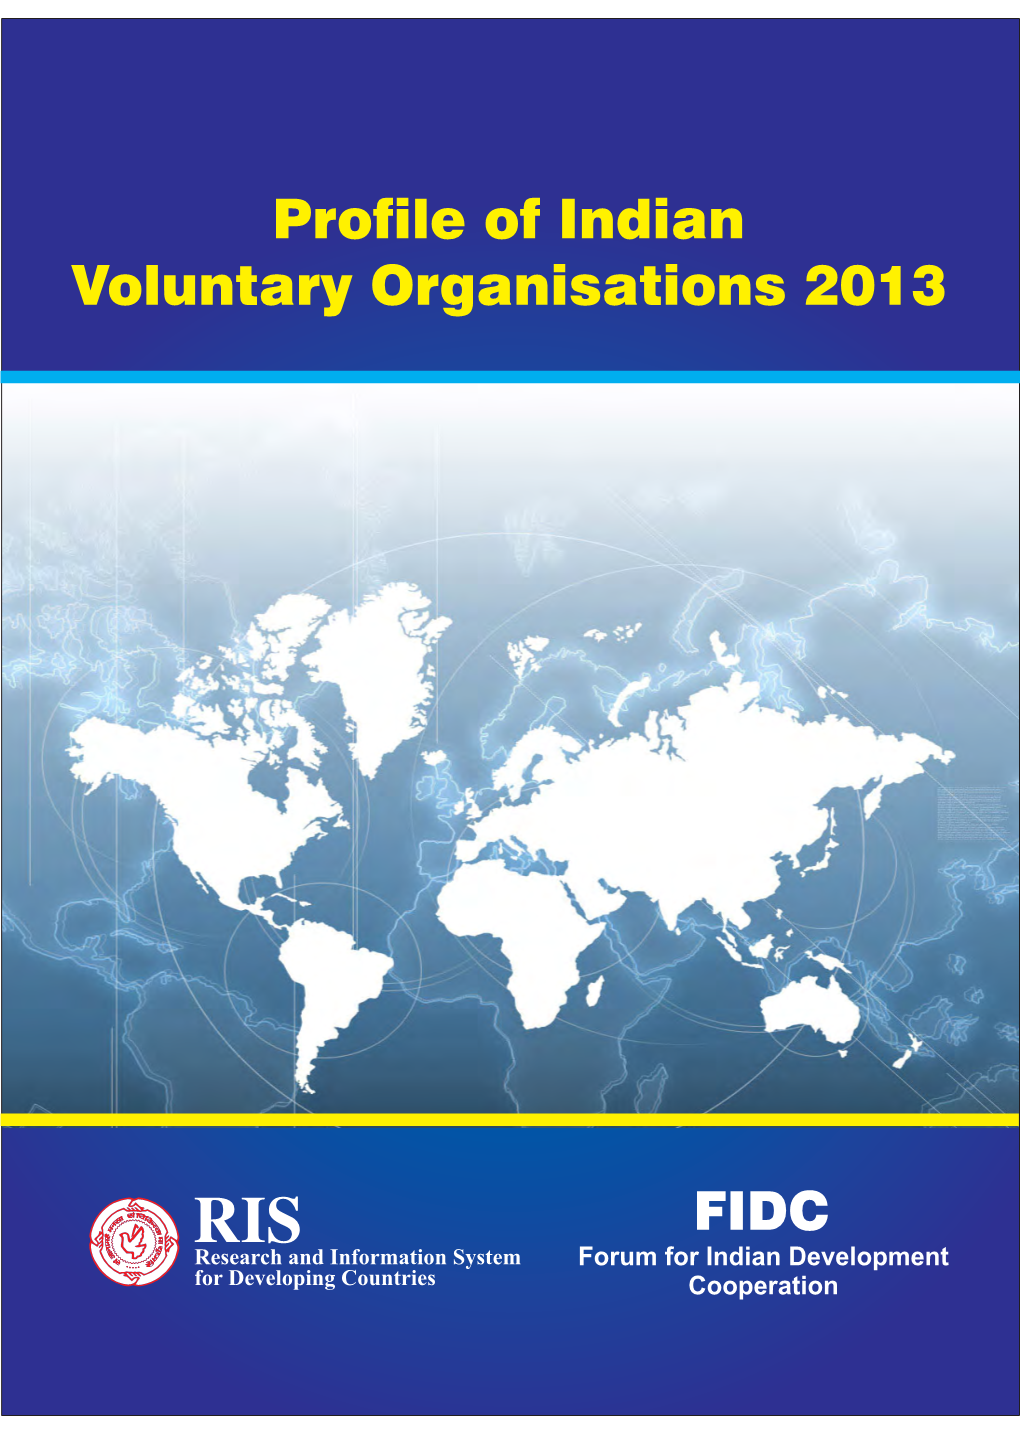 Profile of Indian Voluntary Organisations 2013